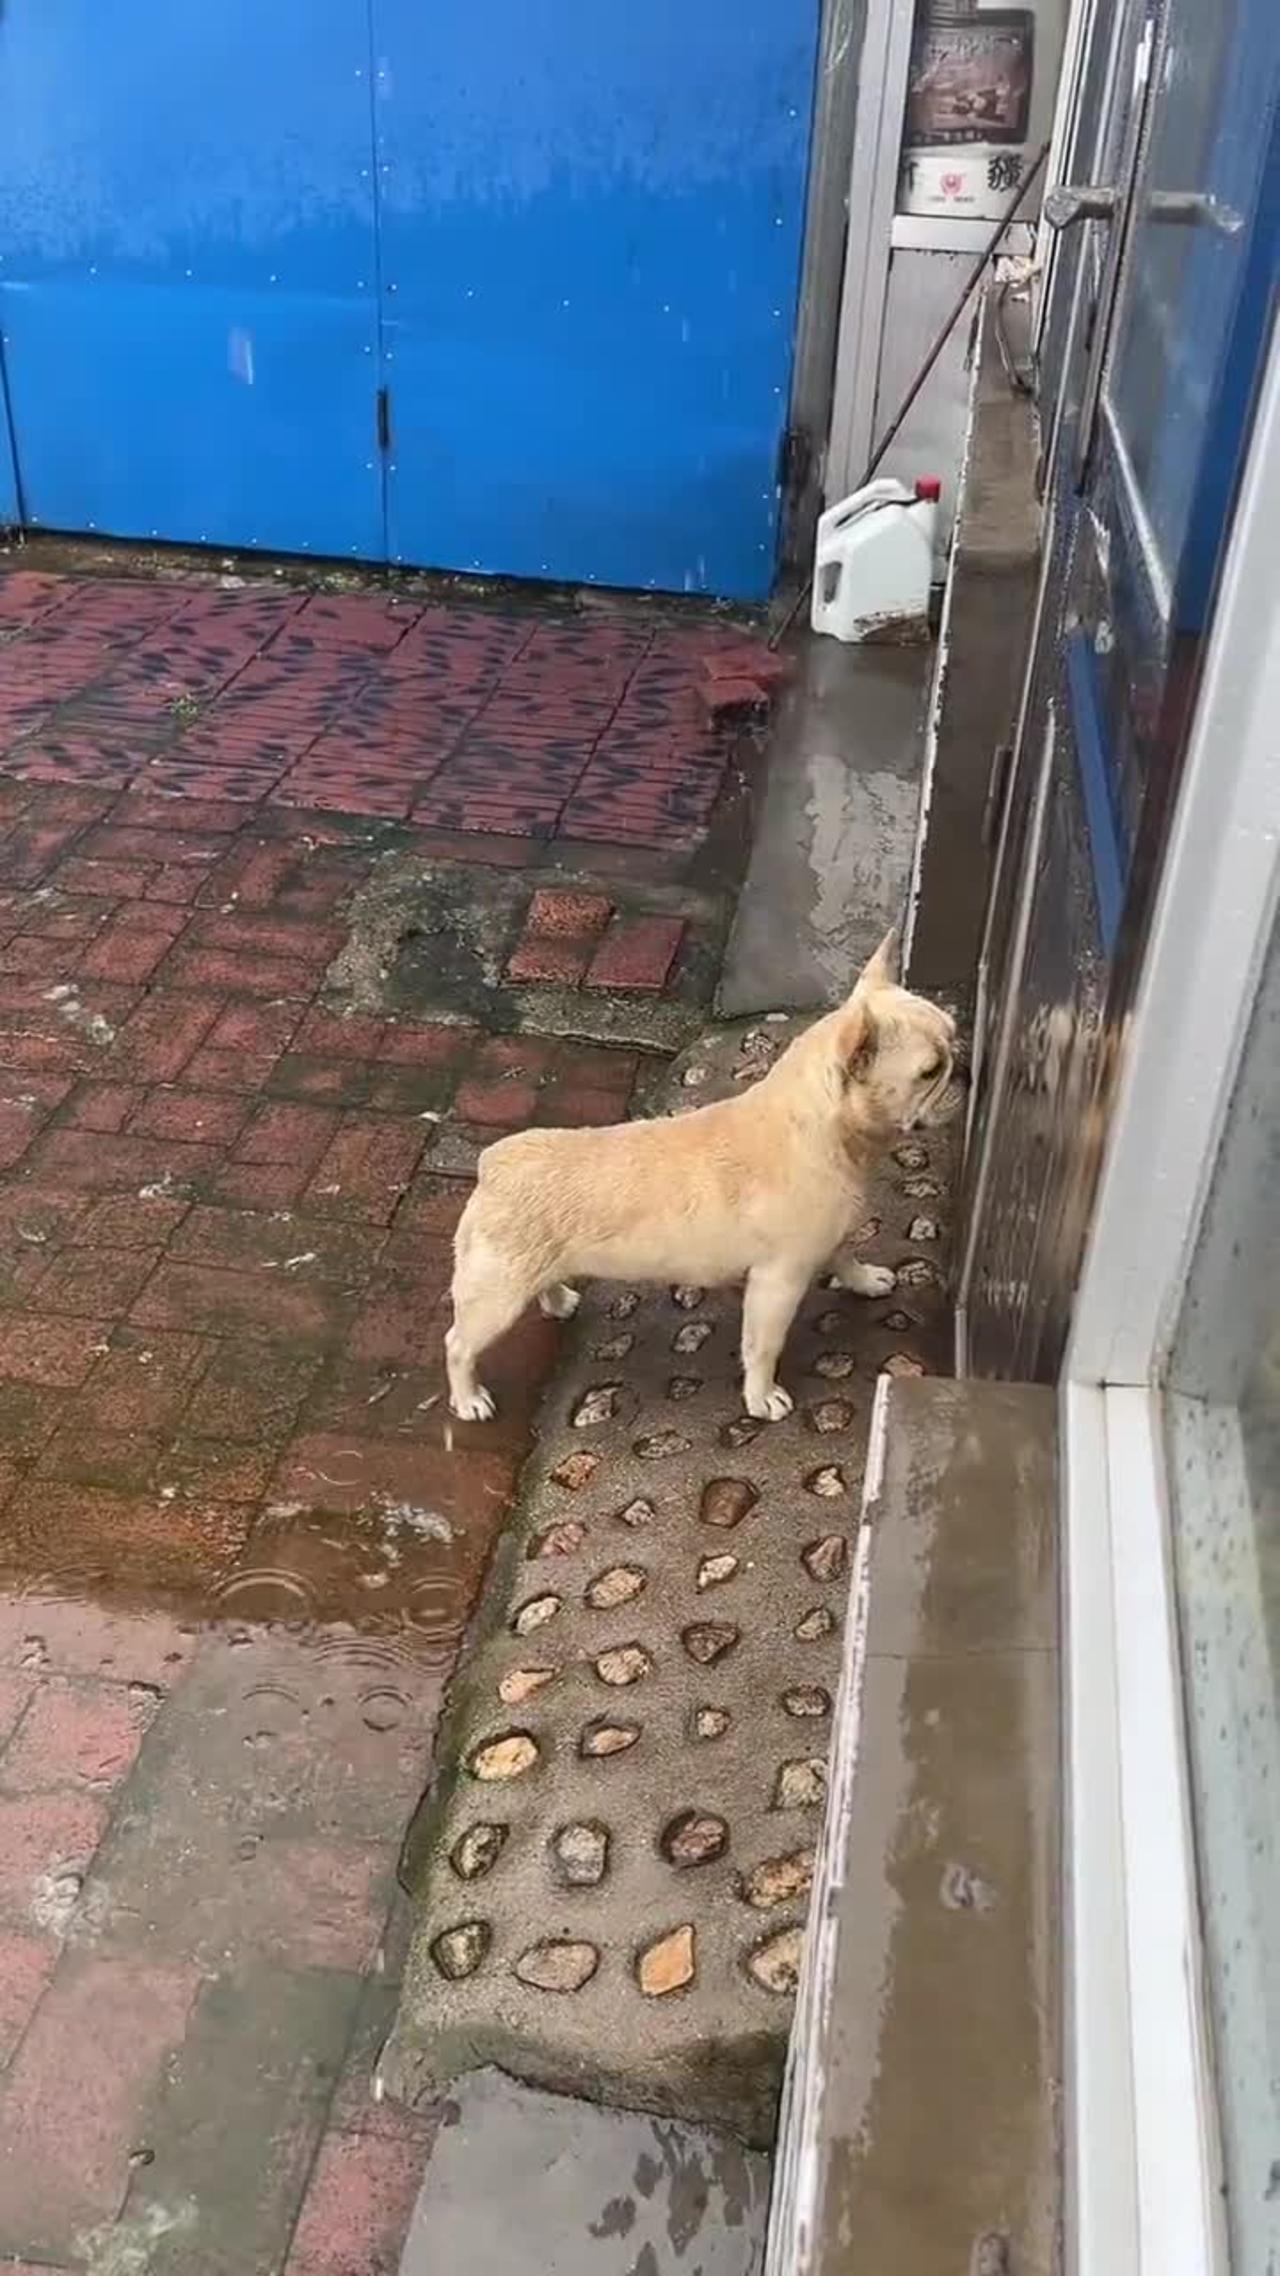 It rained and the dog was left at the door